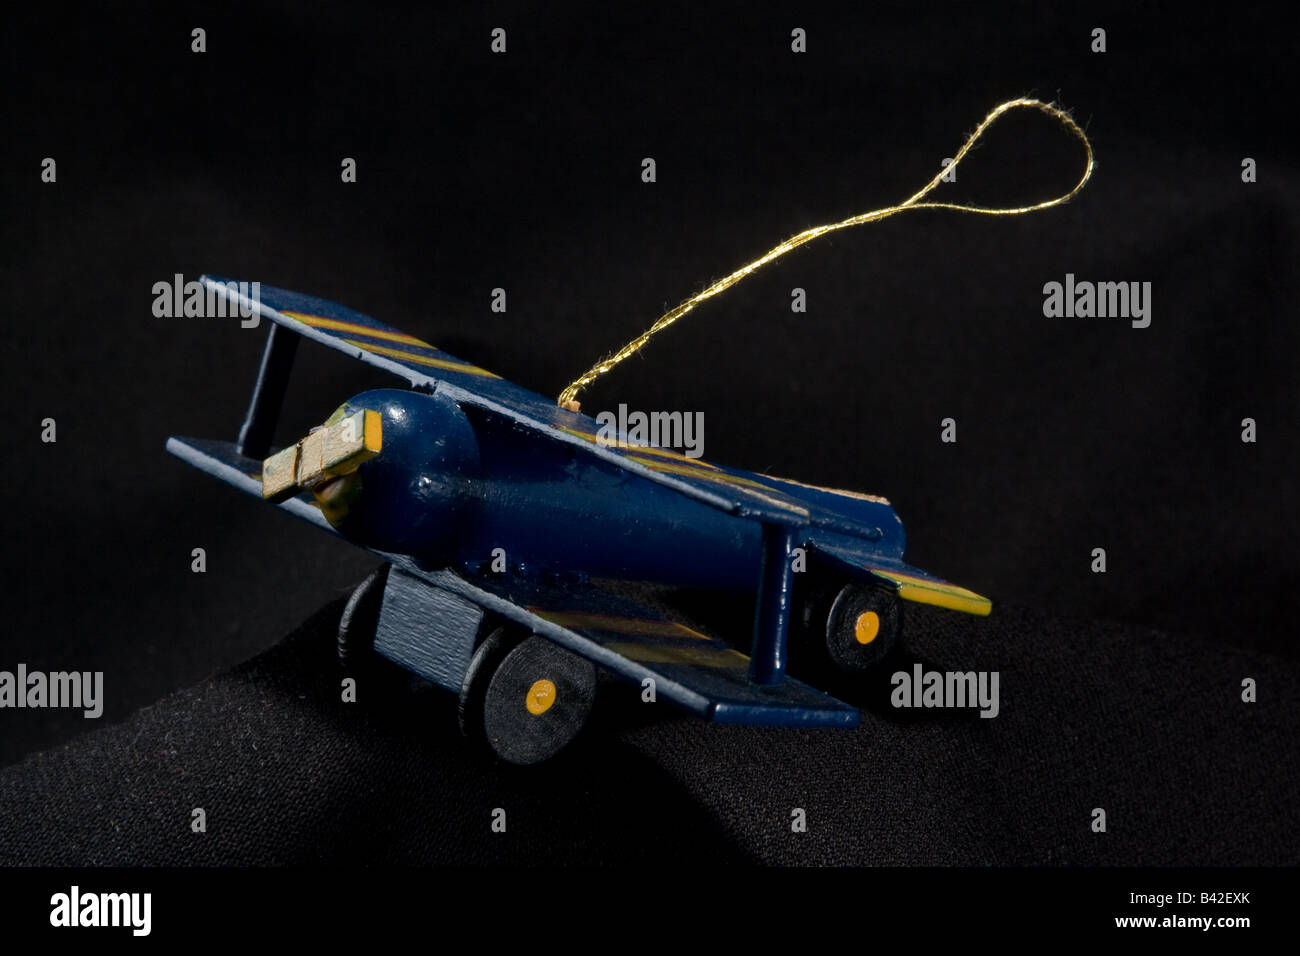 A blue and yellow wooden biplane used as a christmas ornament or decoration with a gold thread, against a black background. Stock Photo